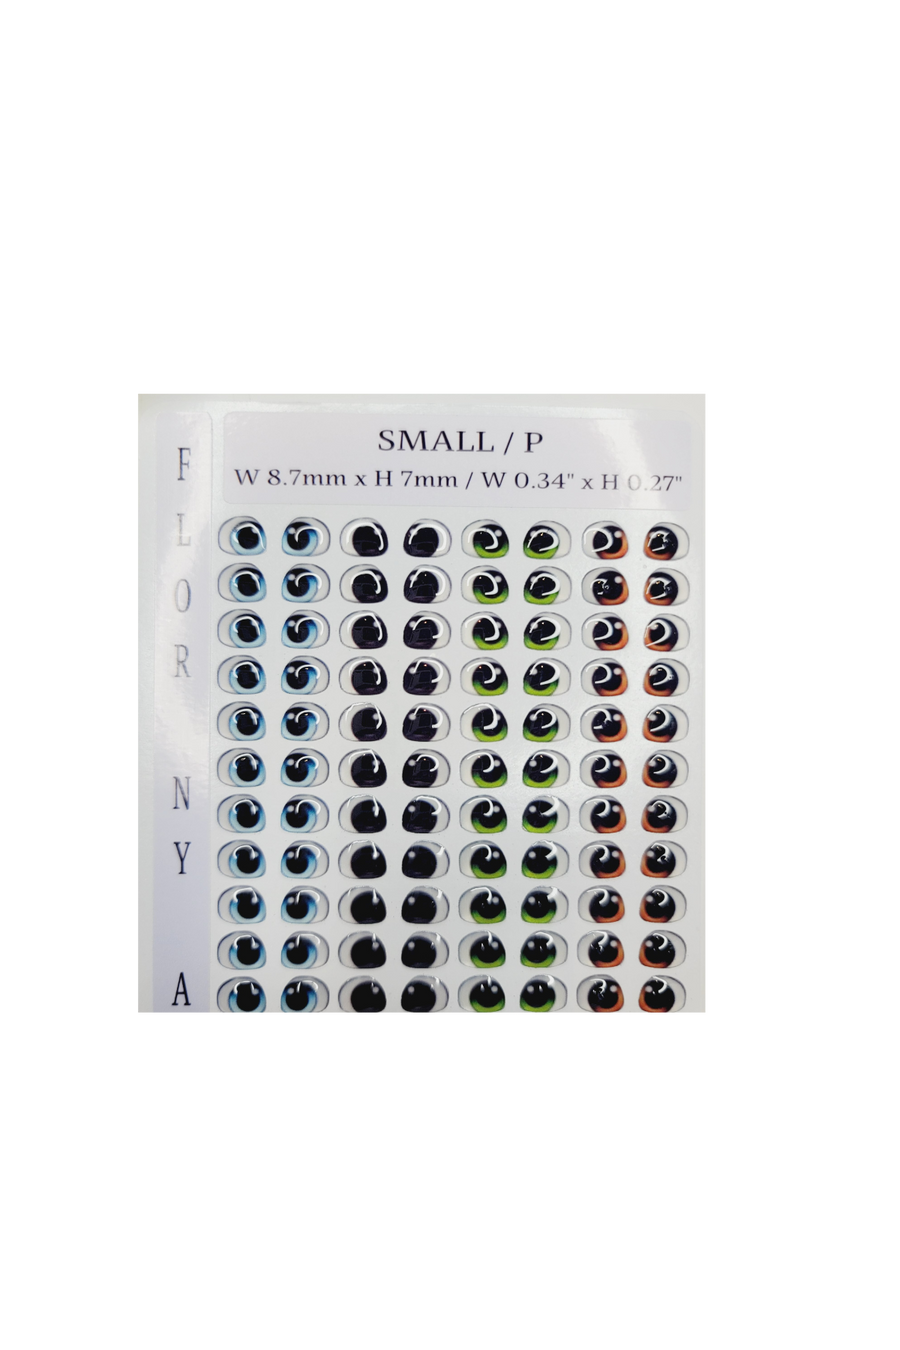 Adhesive Resin Eyes FNY 1002 - Small/P - 64 Pairs - W/H: 8.7mm x 7mm (0.34" x 0.27") - for use with Cold Porcelain Air Dry Clay, Polymer Clay, EVA, Felt, Fabric, Plaster, Paper, Ceramic and more